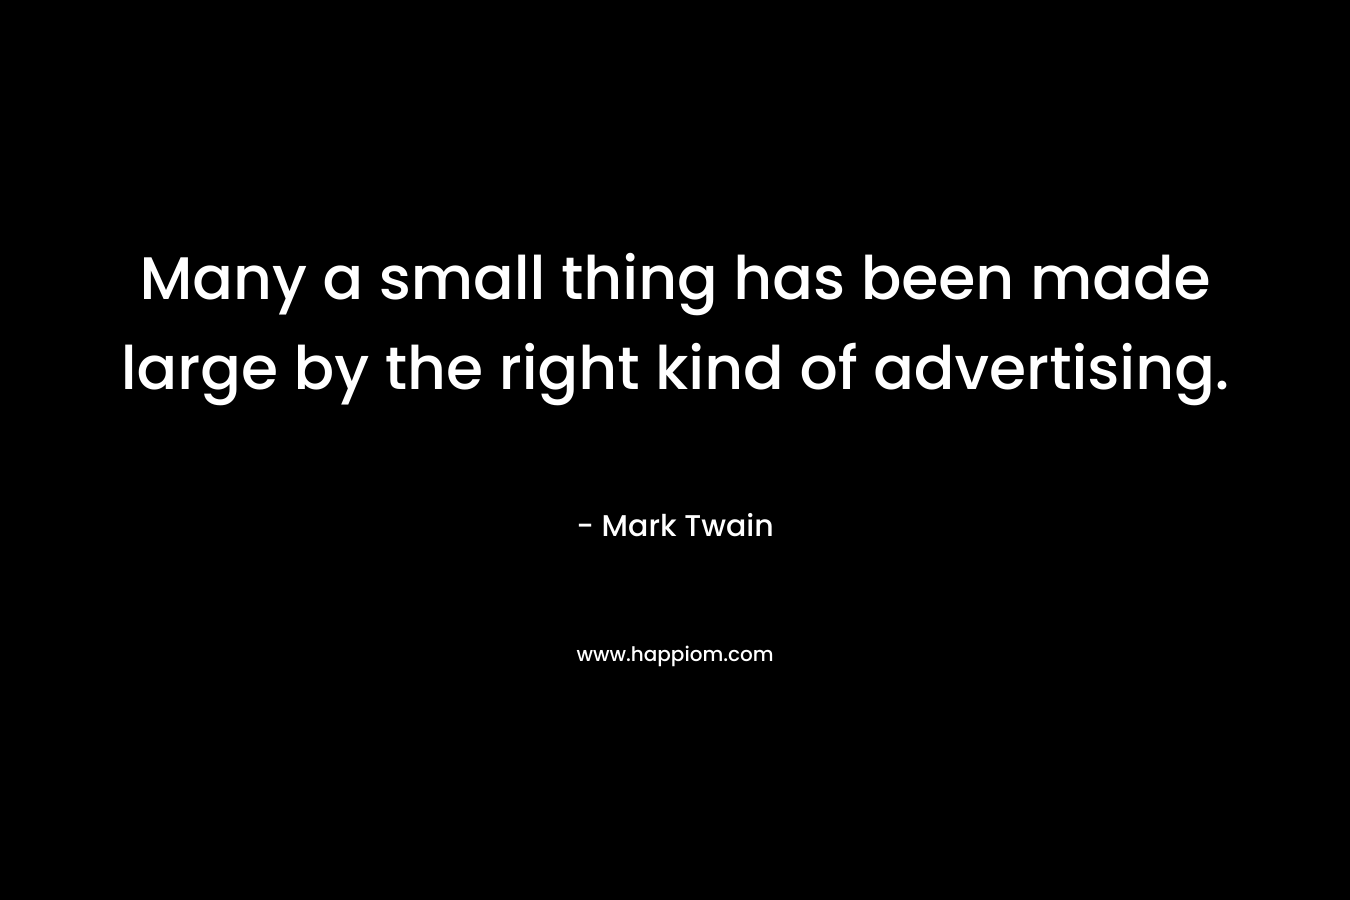 Many a small thing has been made large by the right kind of advertising. – Mark Twain